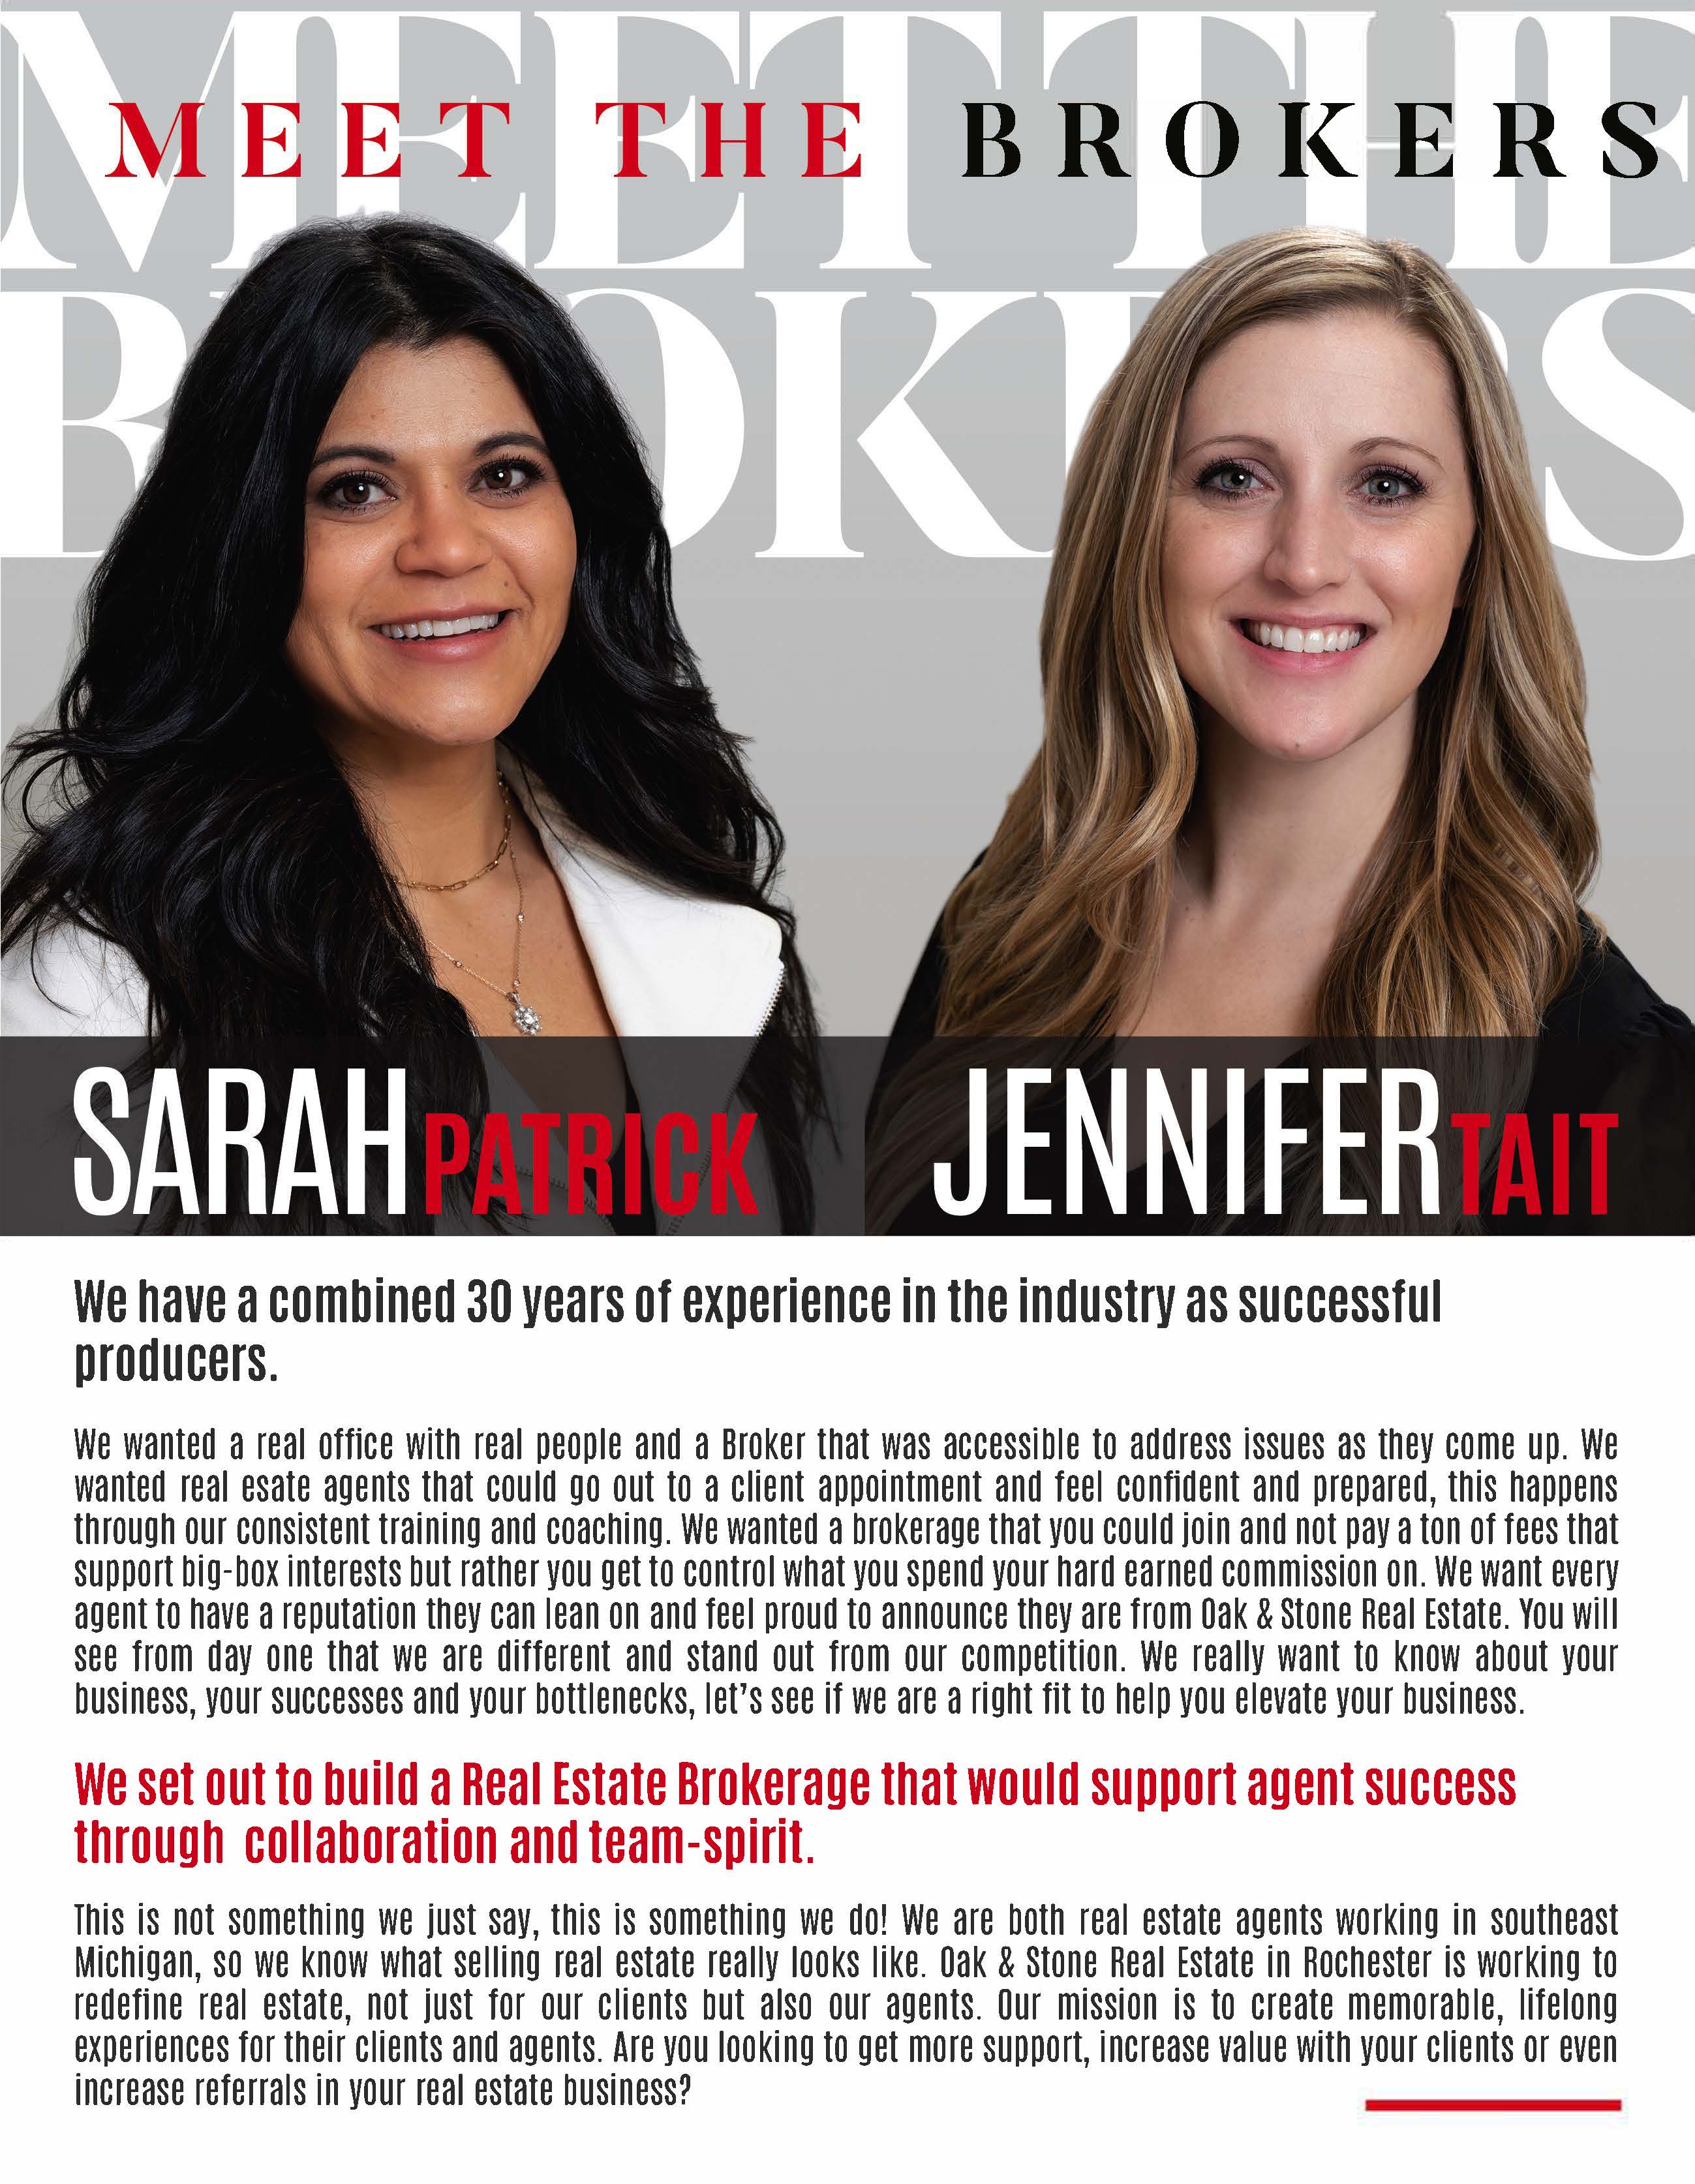 Join Our Brokerage!